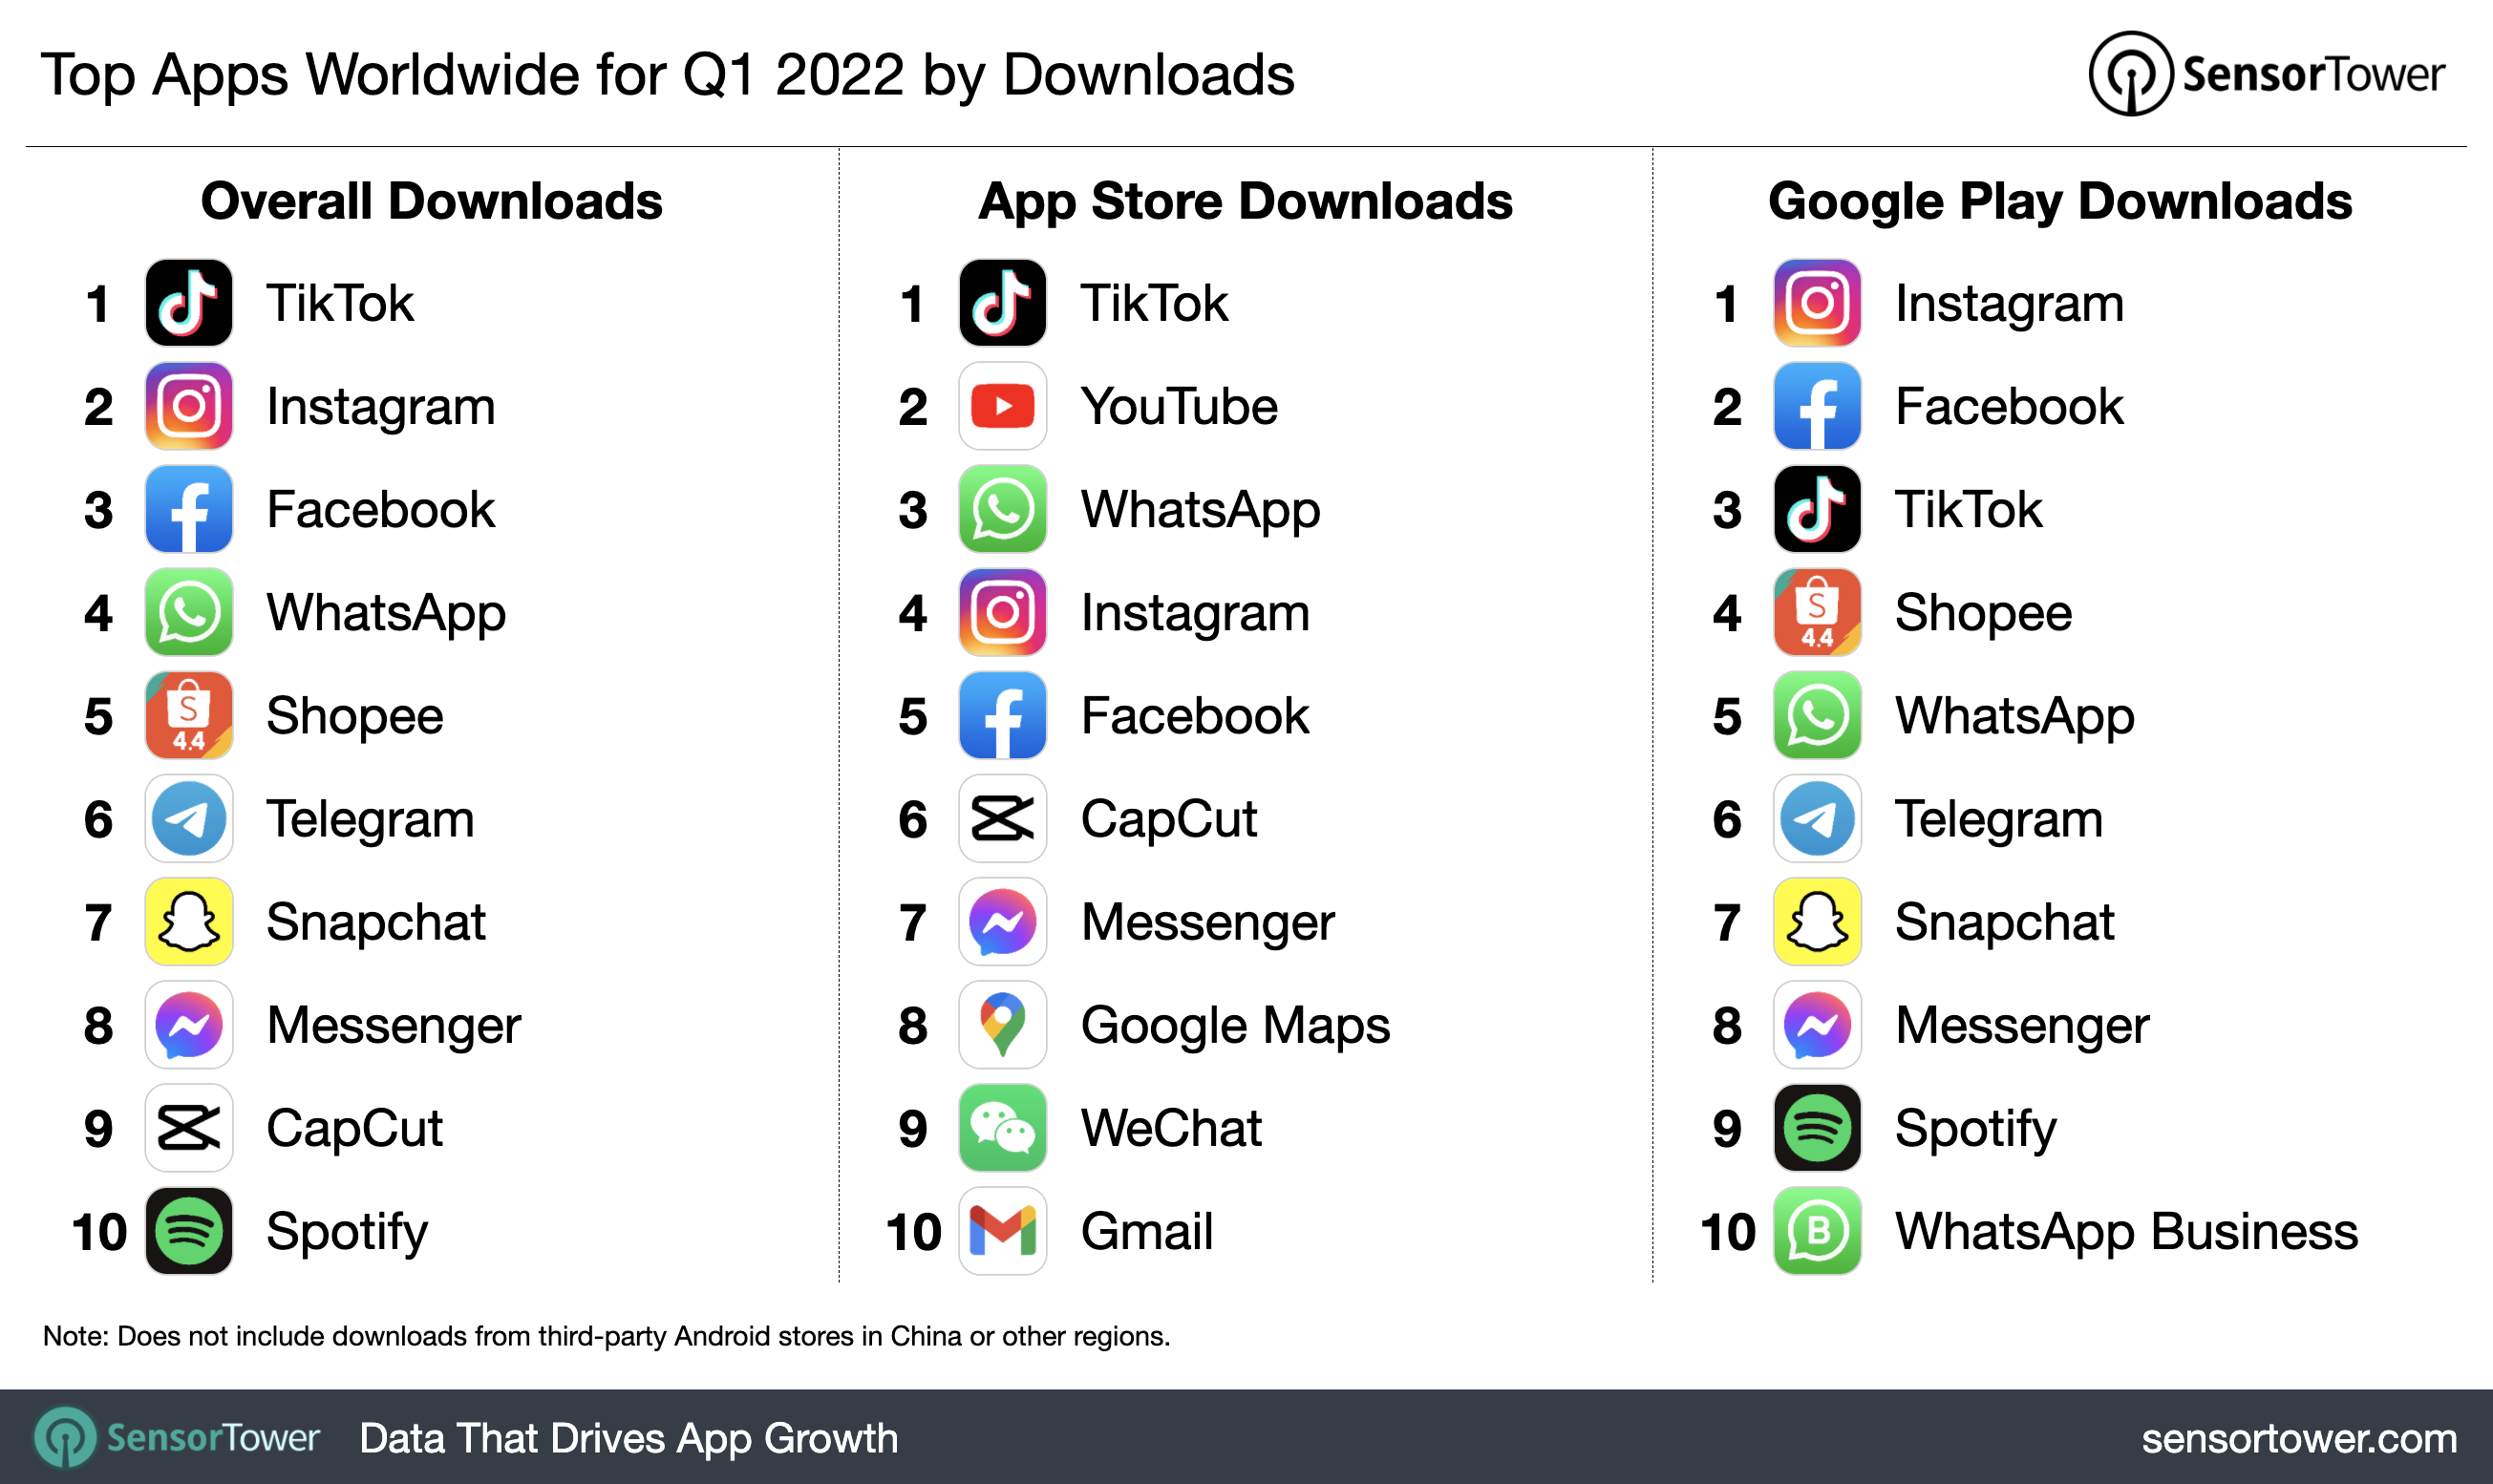 App Store and Google Play growth flat in Q1 2022, says study